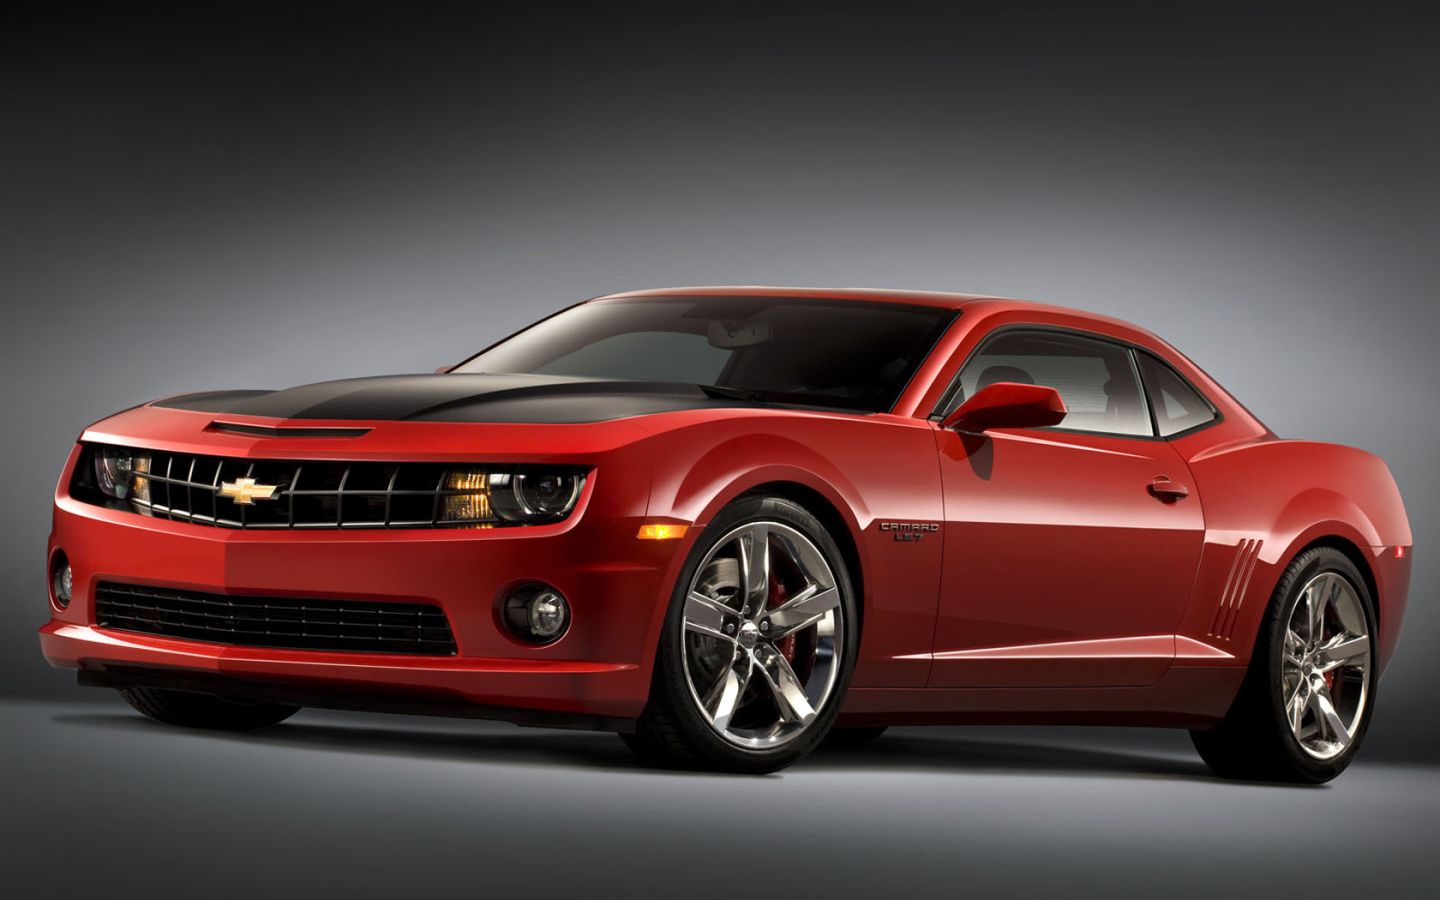 Red Chevy Camaro Wallpaper 4721 Hd Wallpapers in Cars   Imagescicom